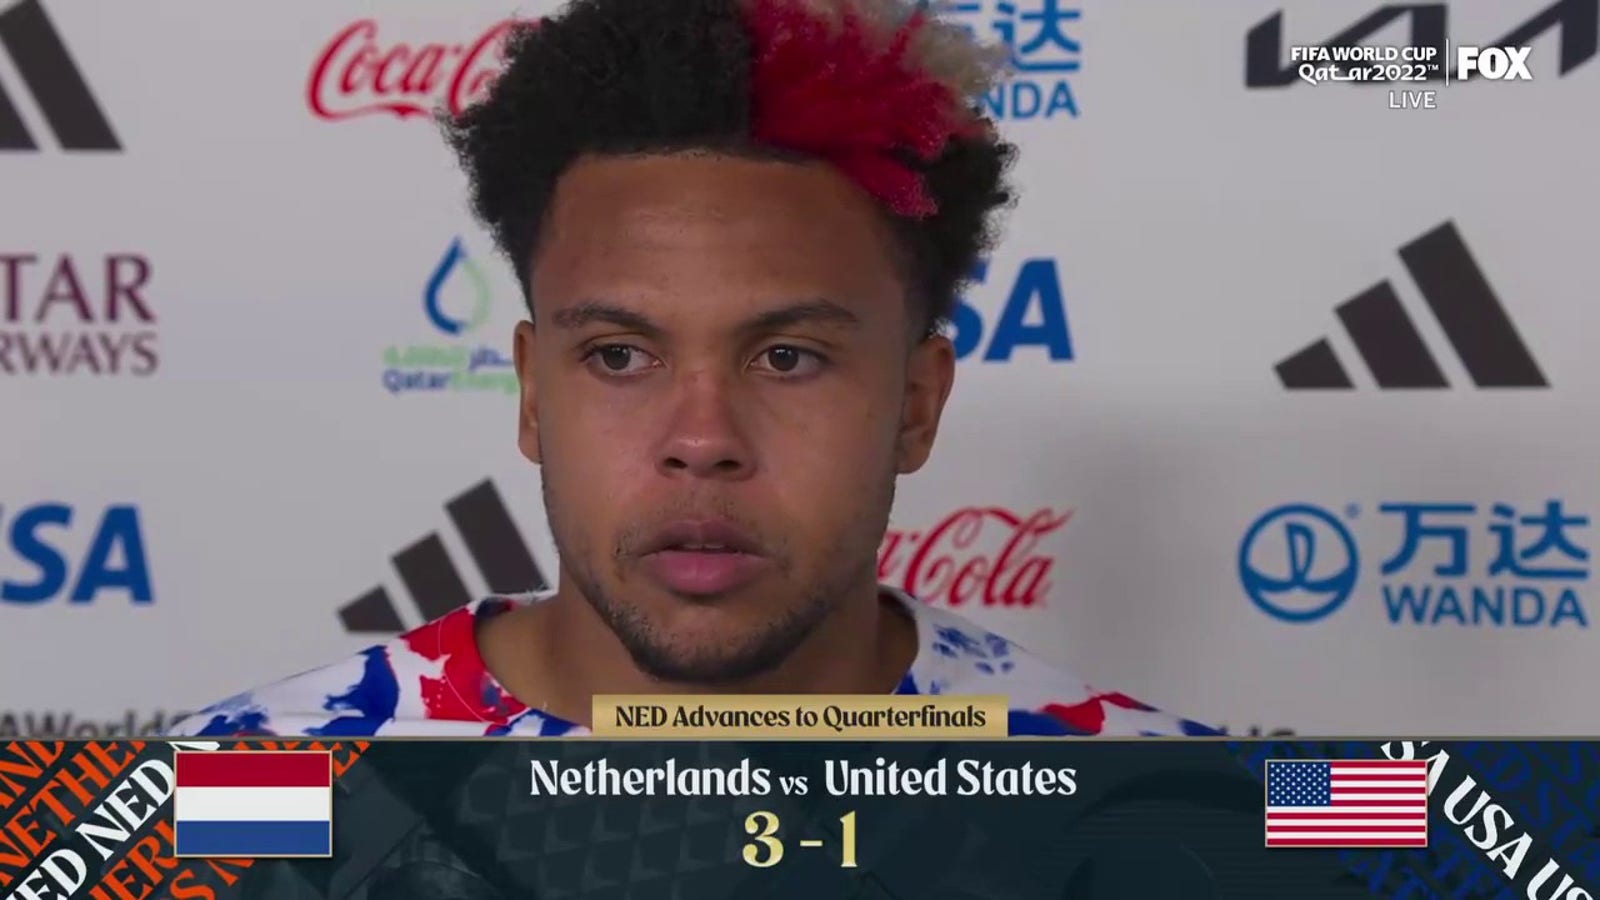 'We didn't want the journey to end' - an emotional Weston McKennie discusses USMNT mindset 